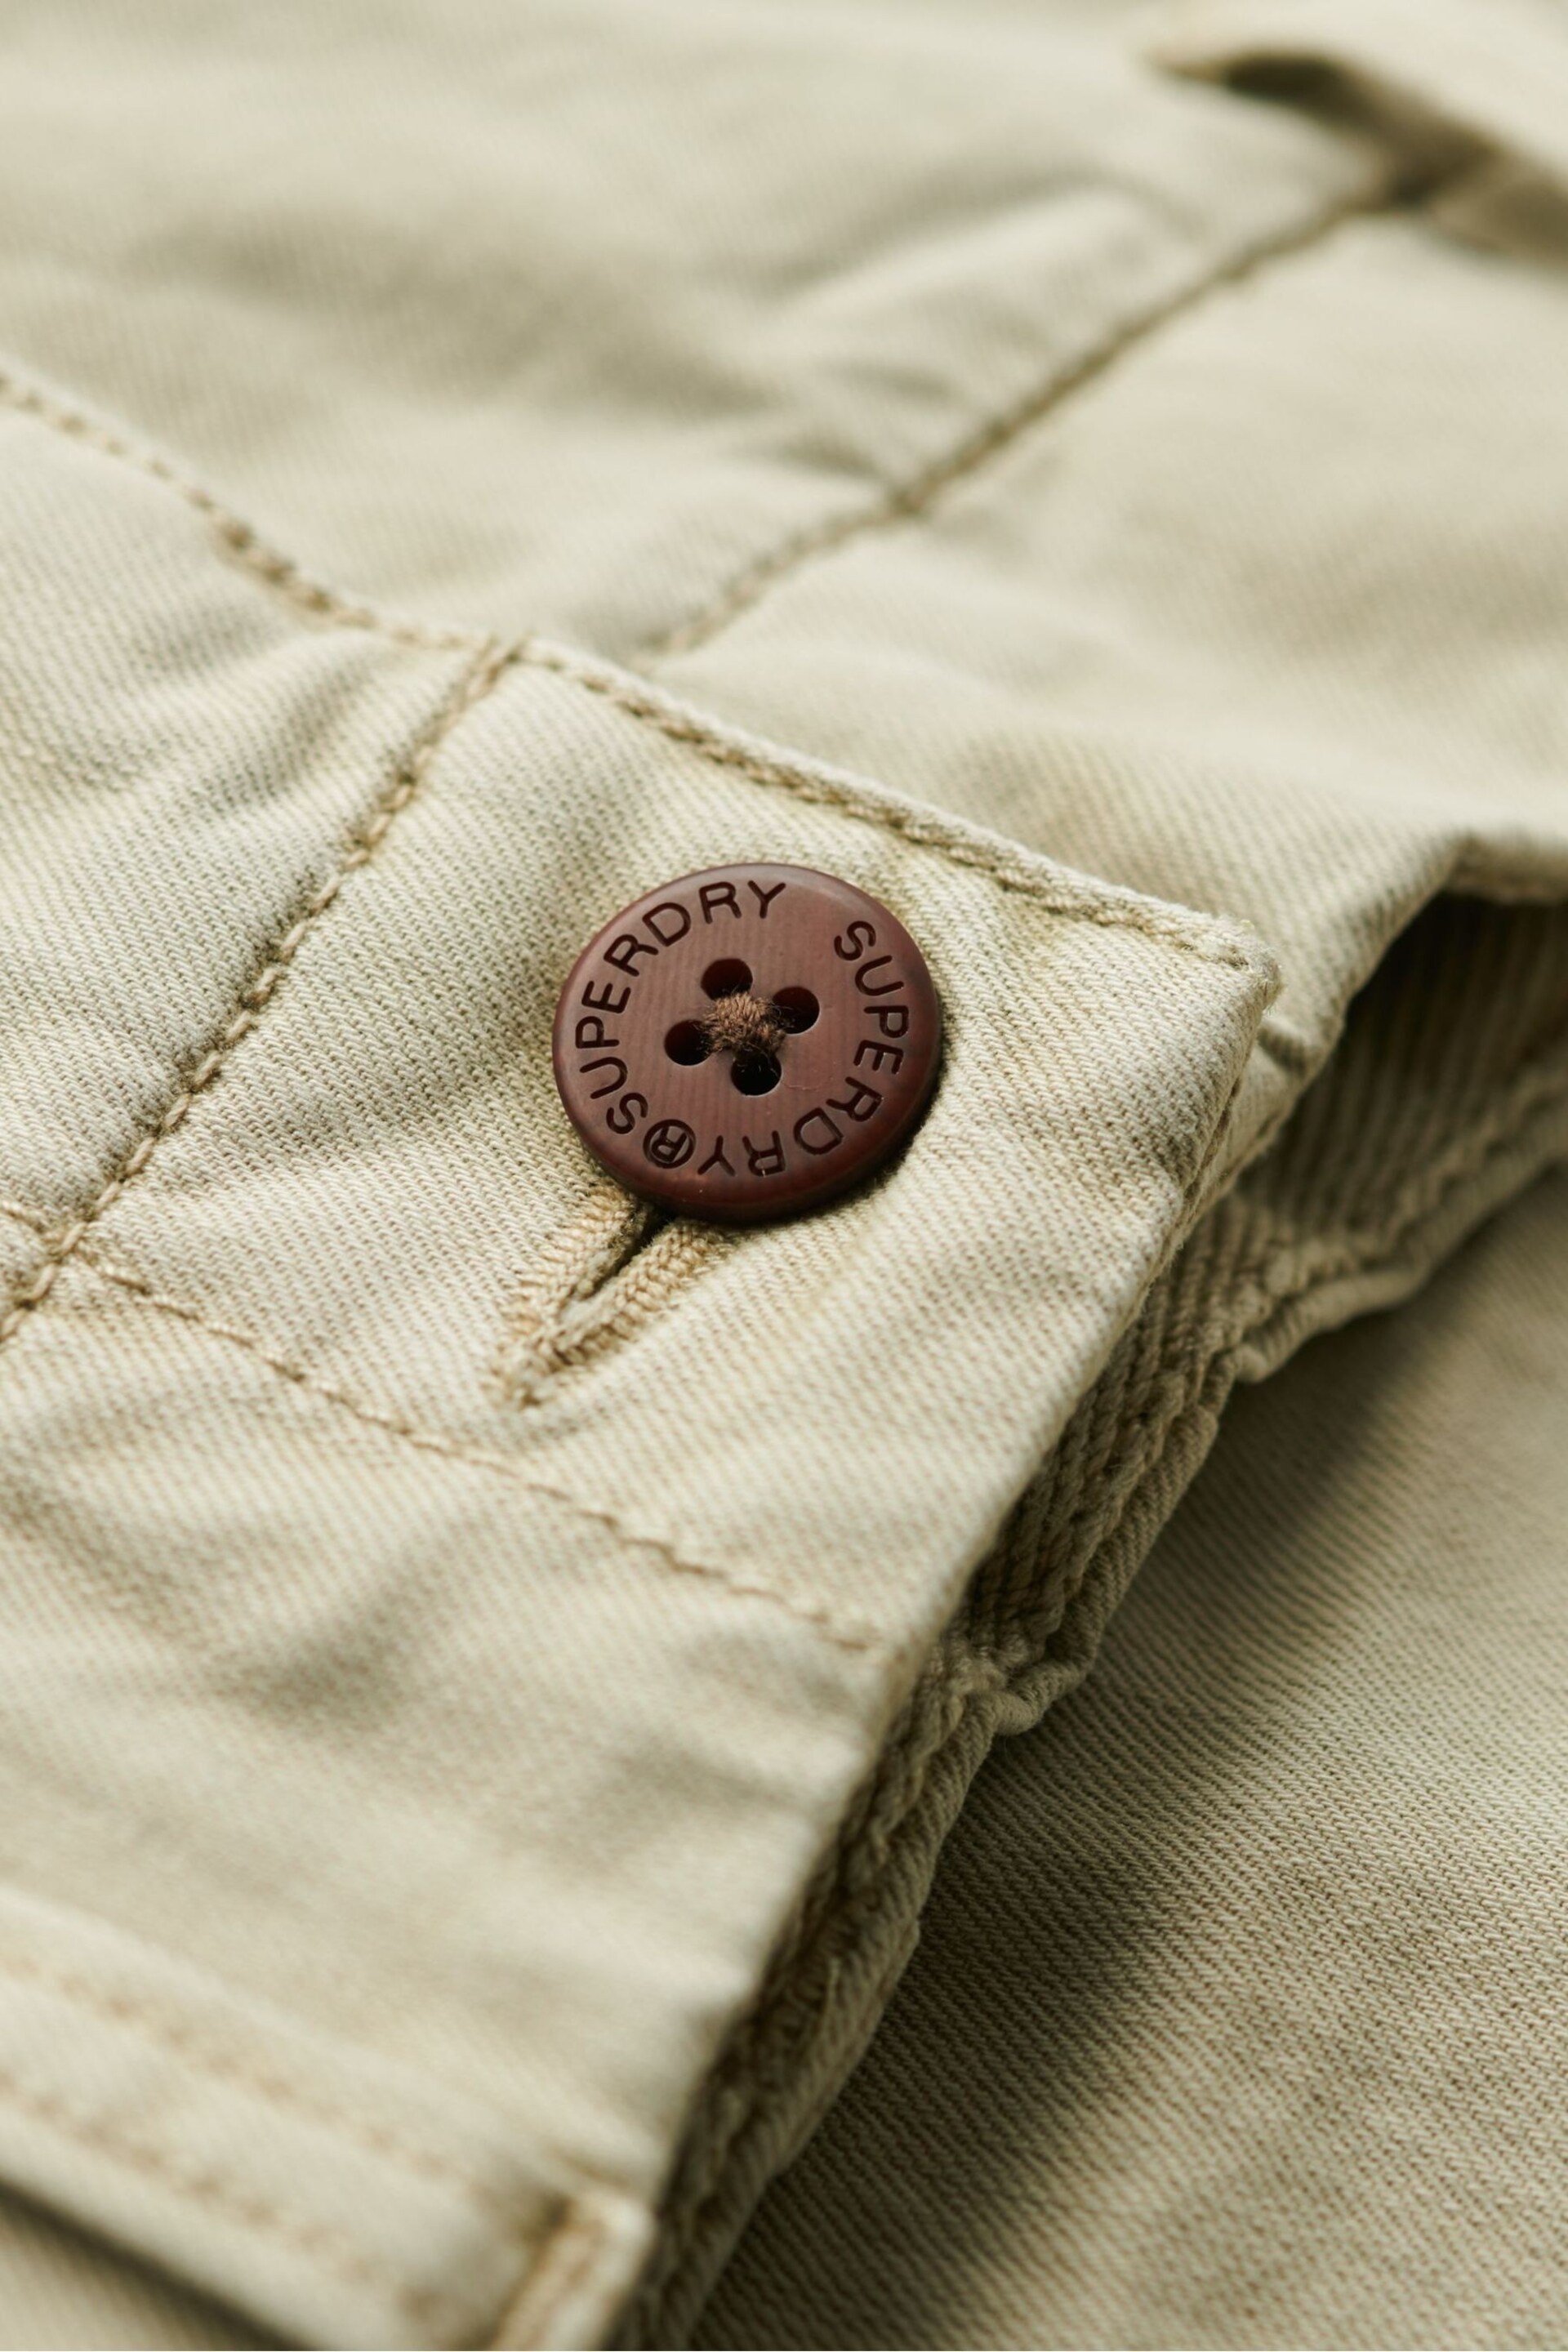 Superdry Natural International Chino Trousers - Image 7 of 8